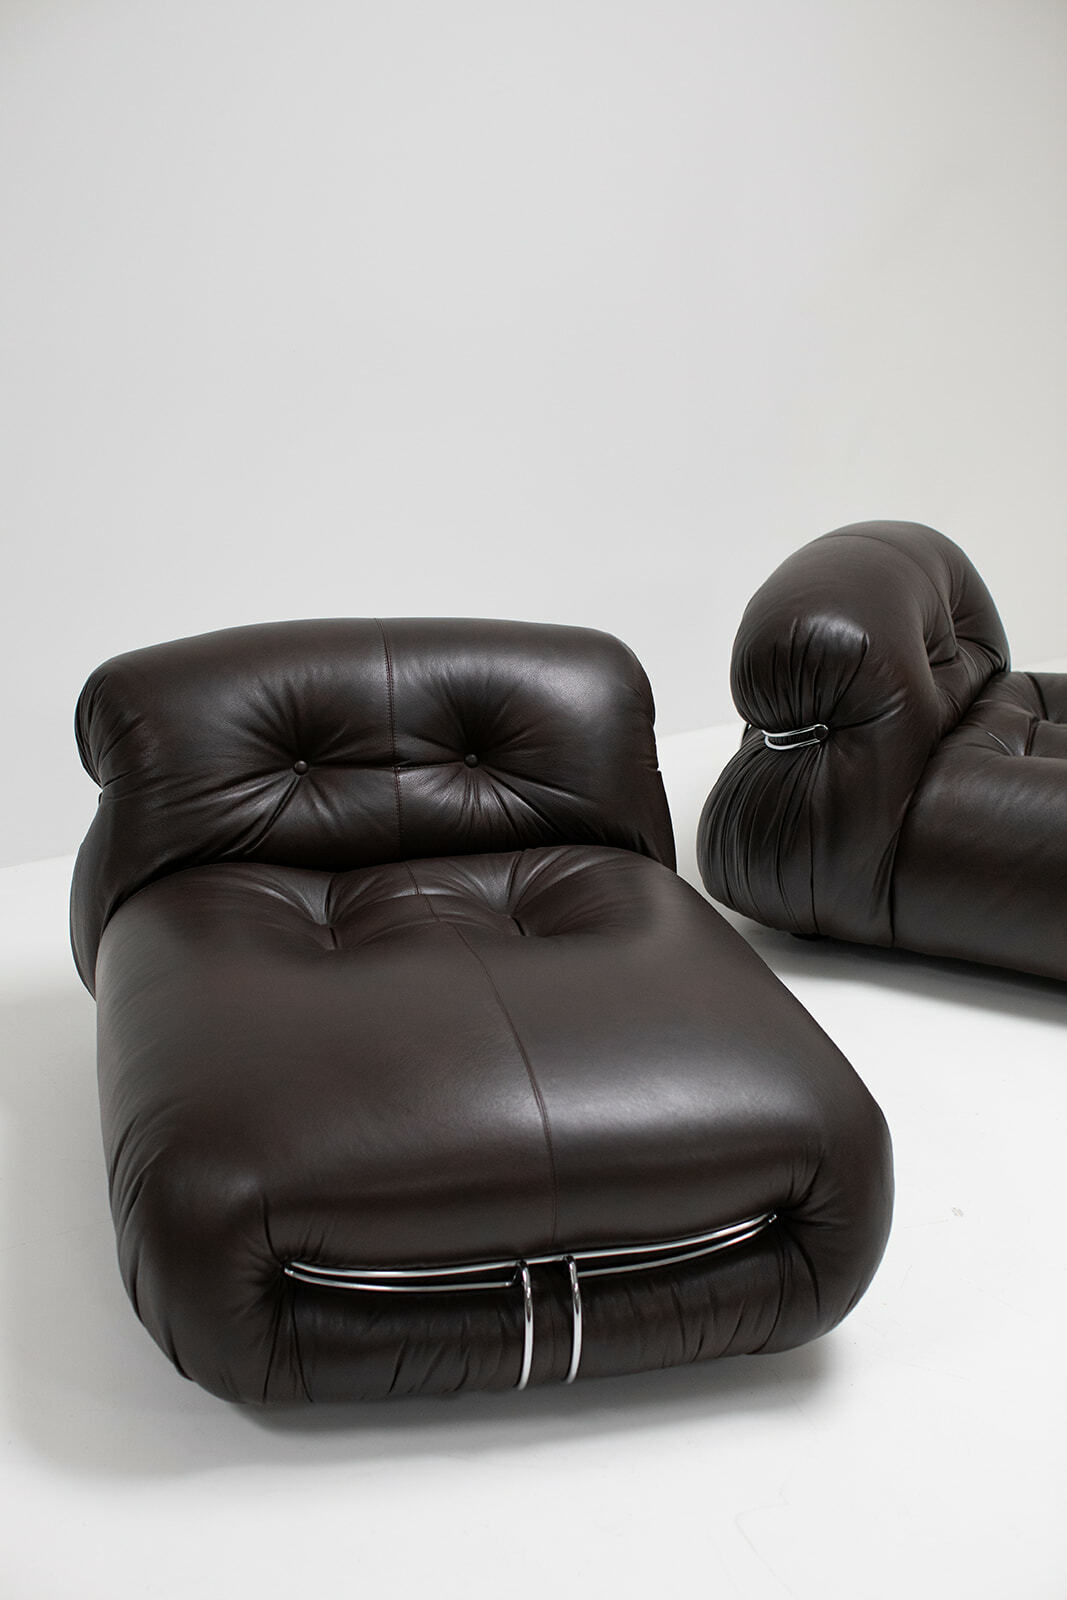 Pair of dark brown leather Soriano lounge chairs